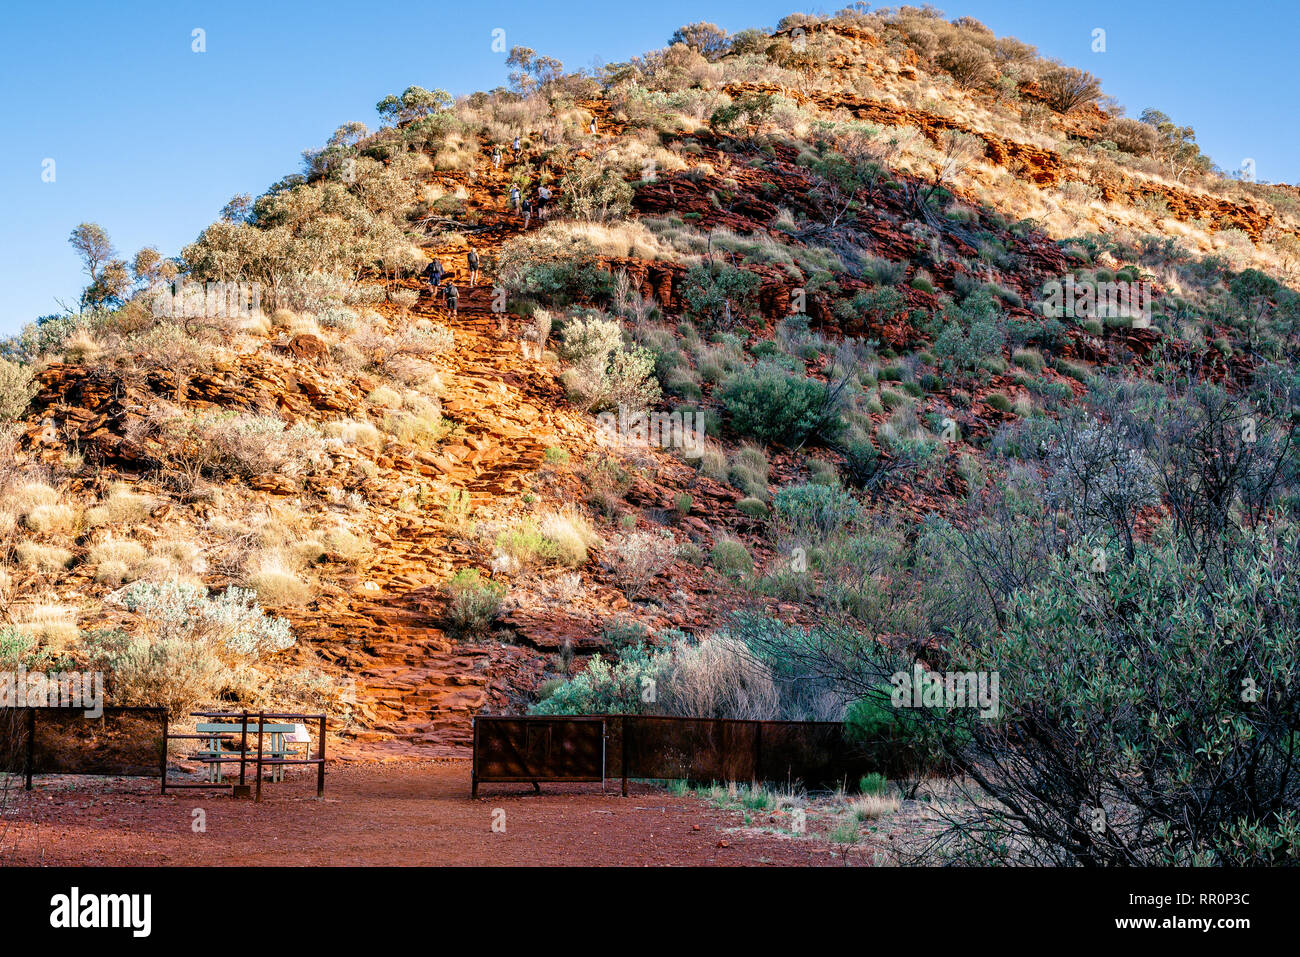 Beginning of Rim walk trail at Kings Canyon in the Northern Territory outback Australia Stock Photo